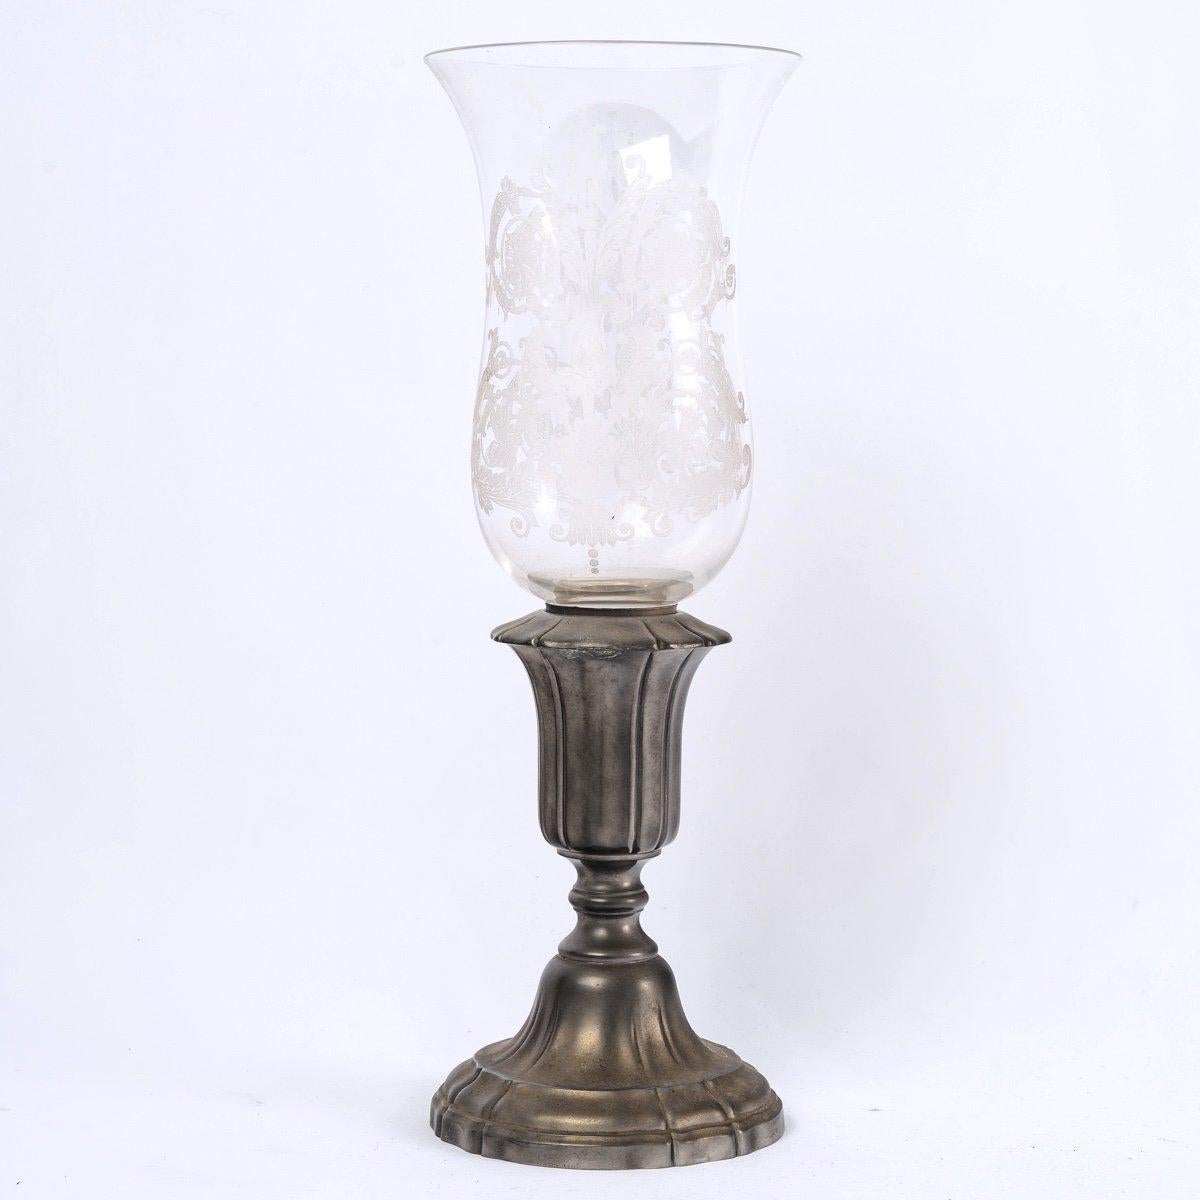 Other Tealight Candlestick Lamp - Baccarat Crystal And Pewter From The Manor - XX th For Sale